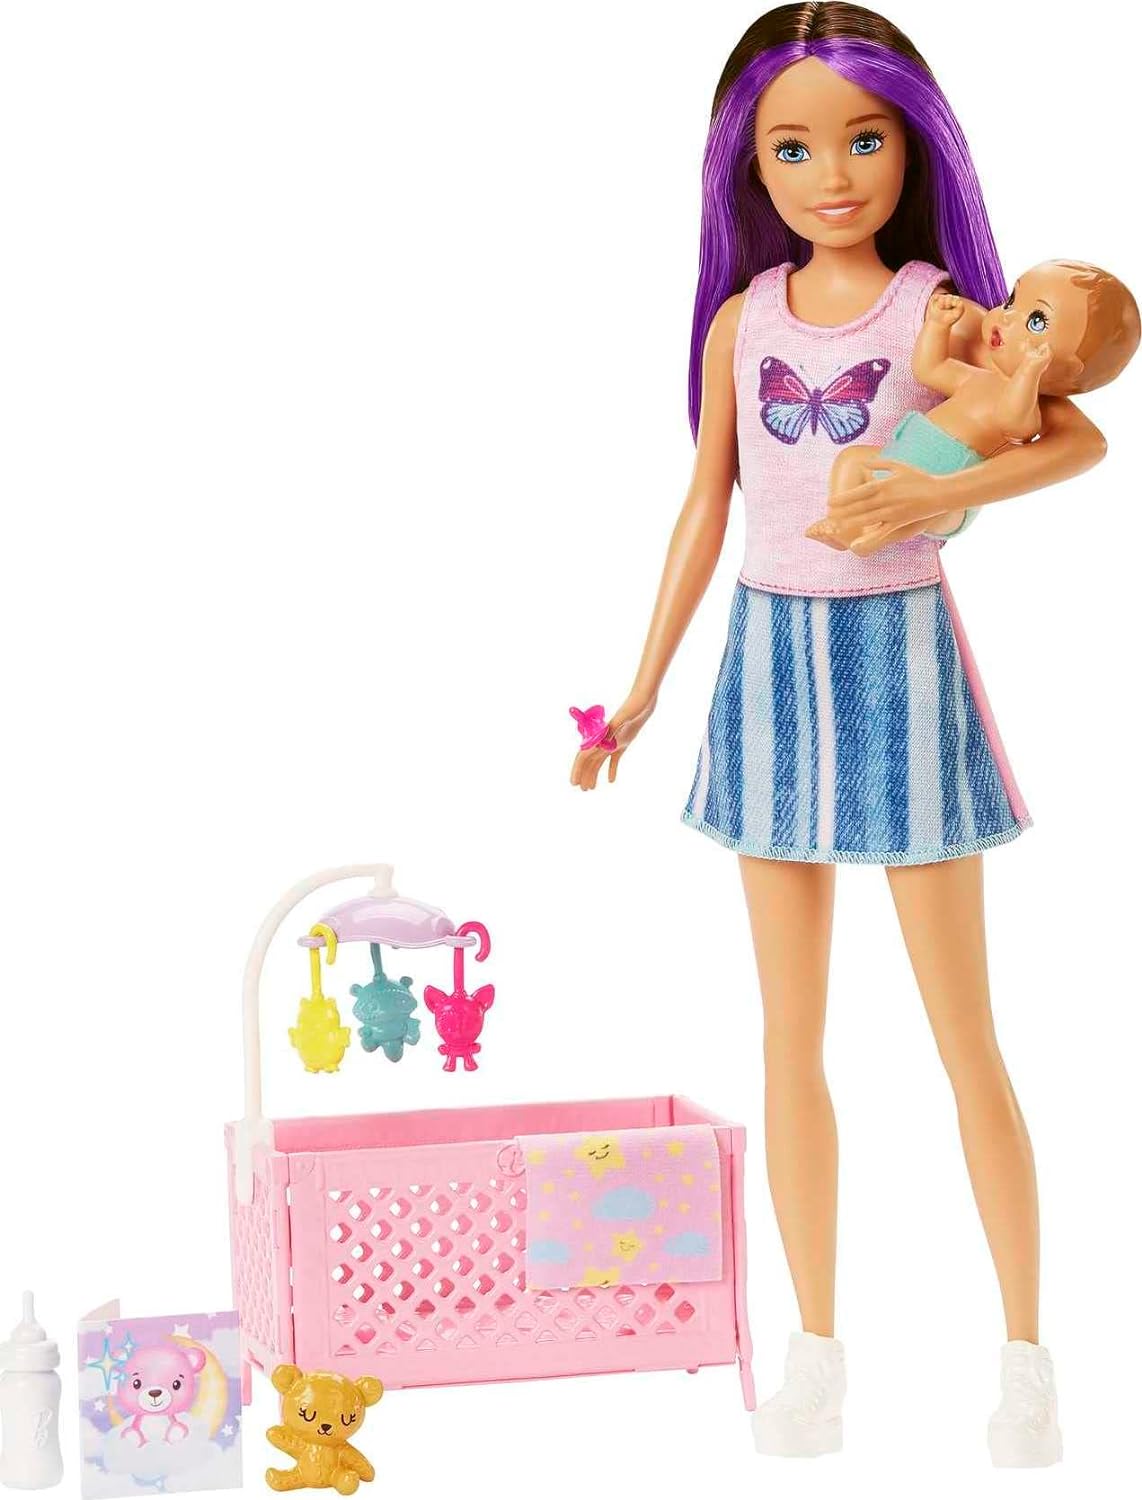 Barbie Skipper Babysitters Inc Crib Playset with Skipper Doll, Baby Doll with Sleepy Eyes, Furniture & Accessories